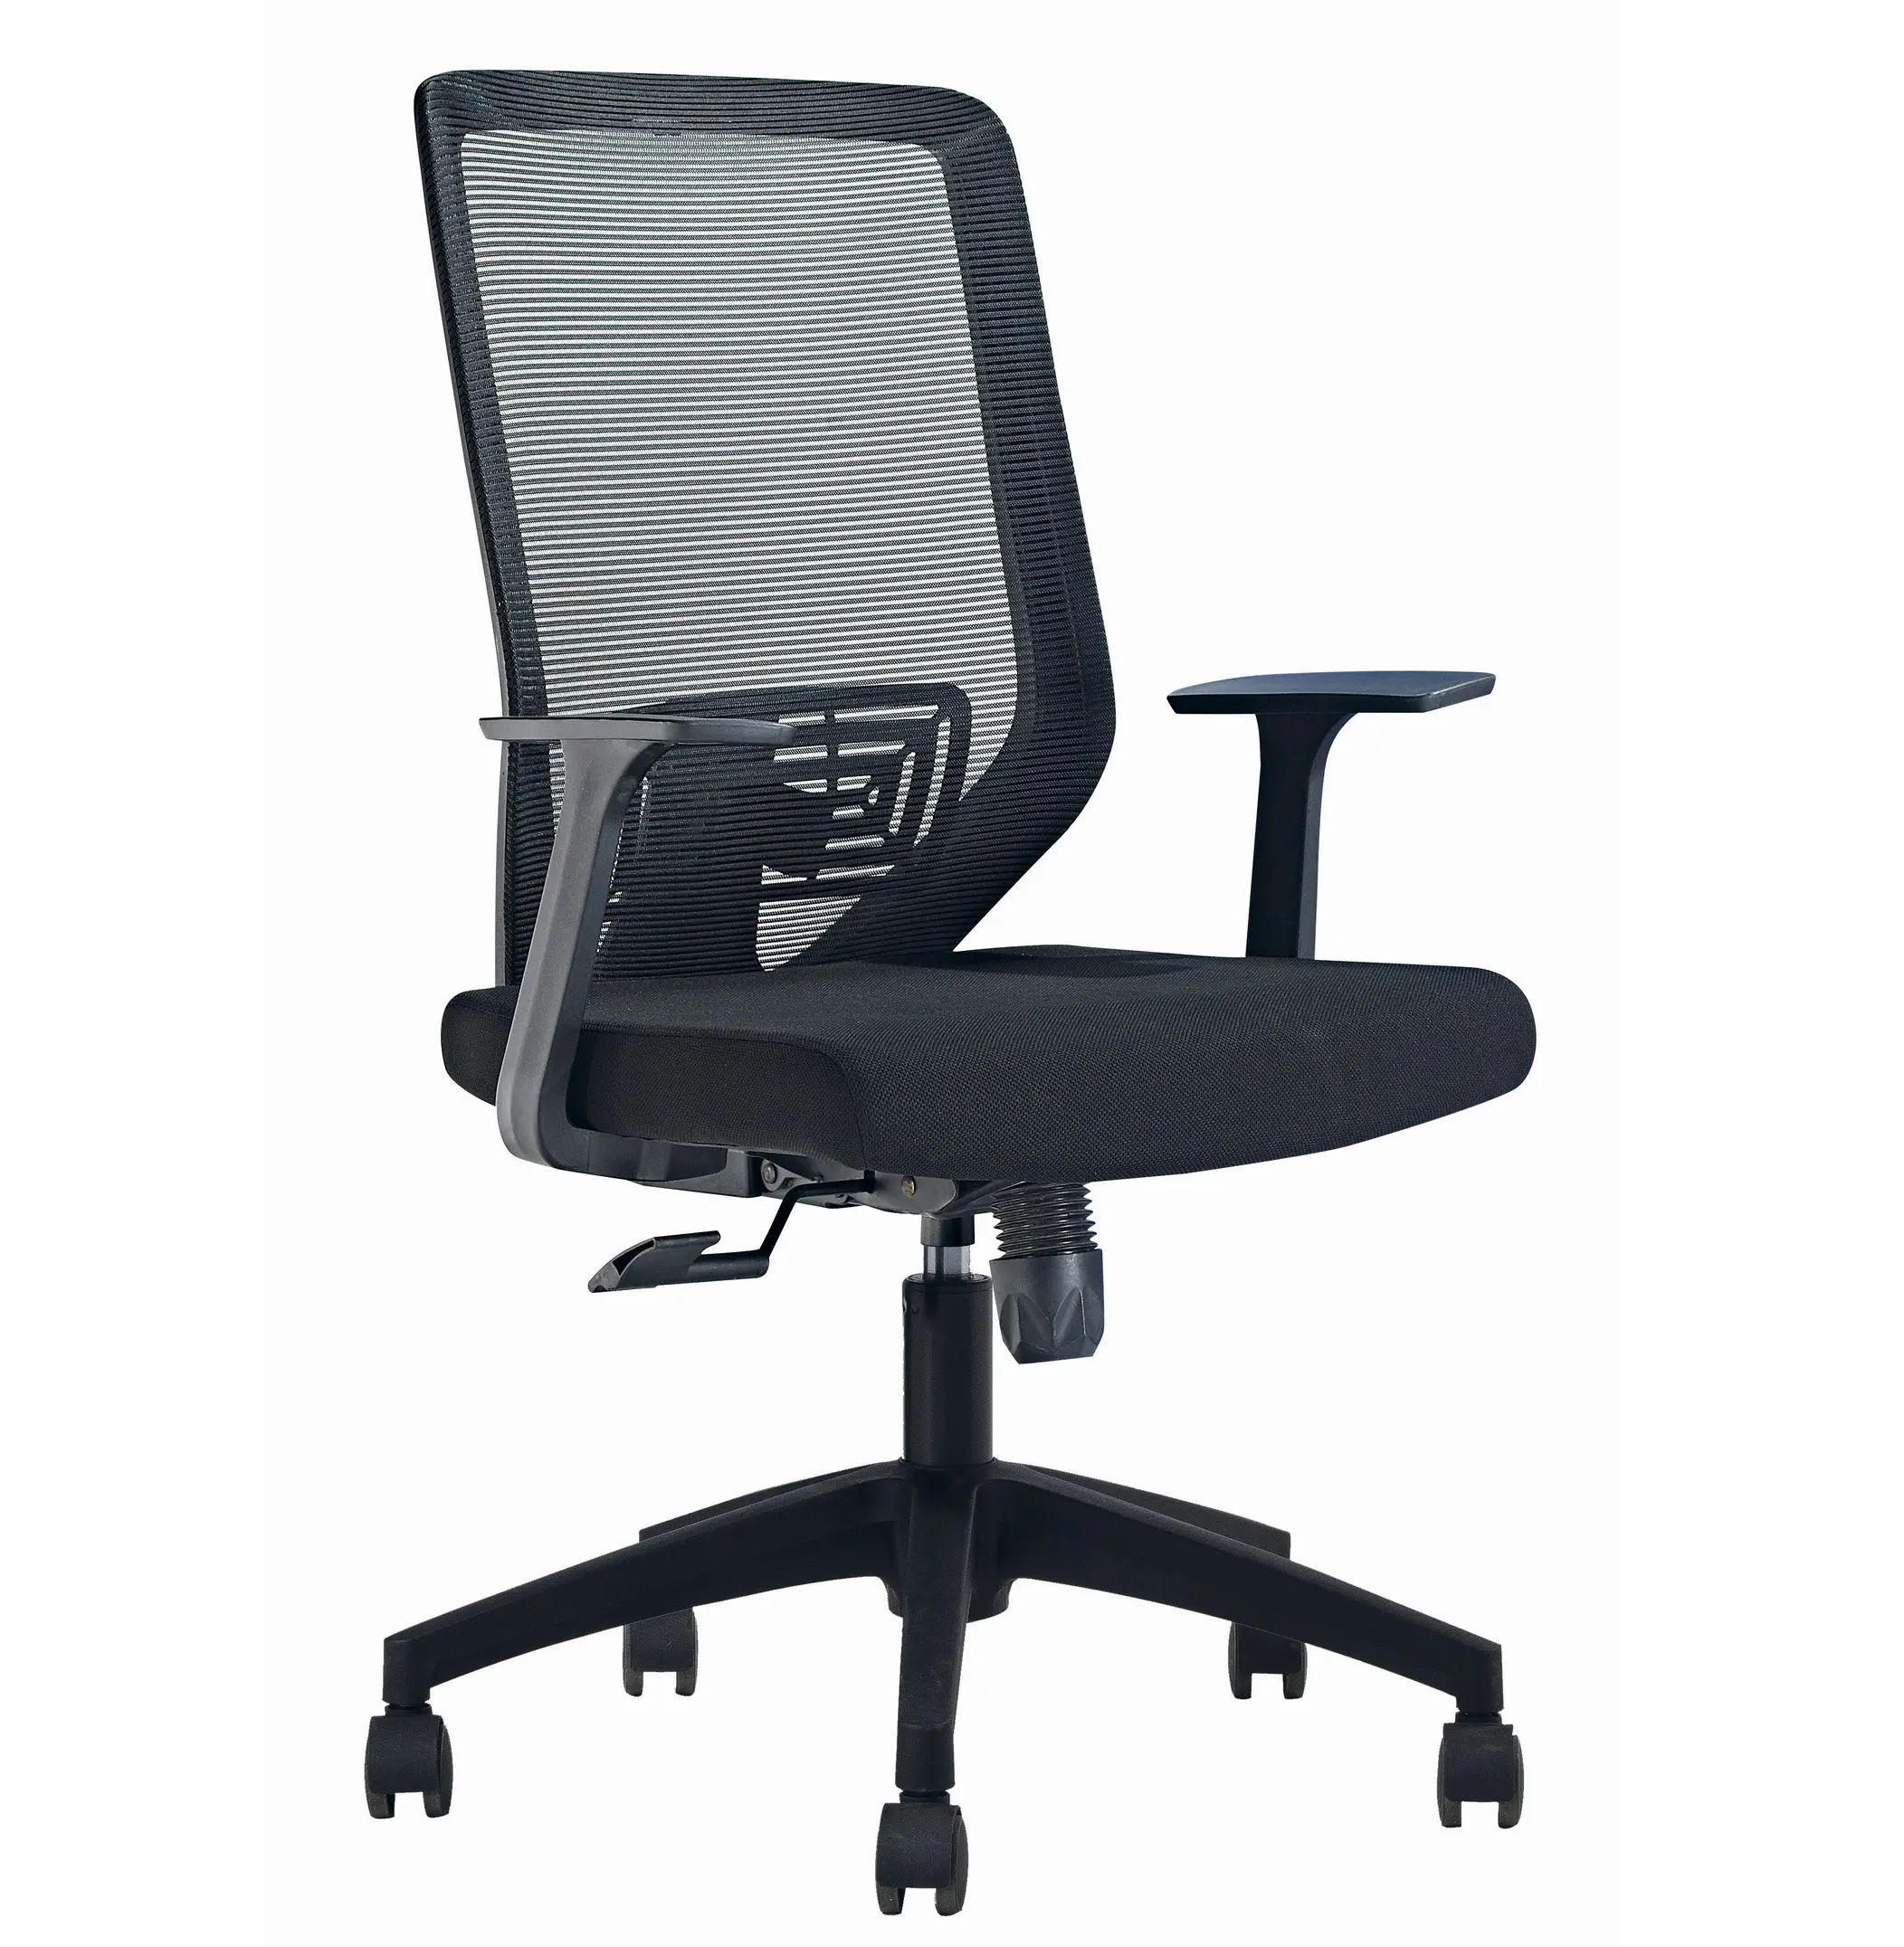 China manufacture manager low back mesh chair executive ergonomic chair gaming chair for office